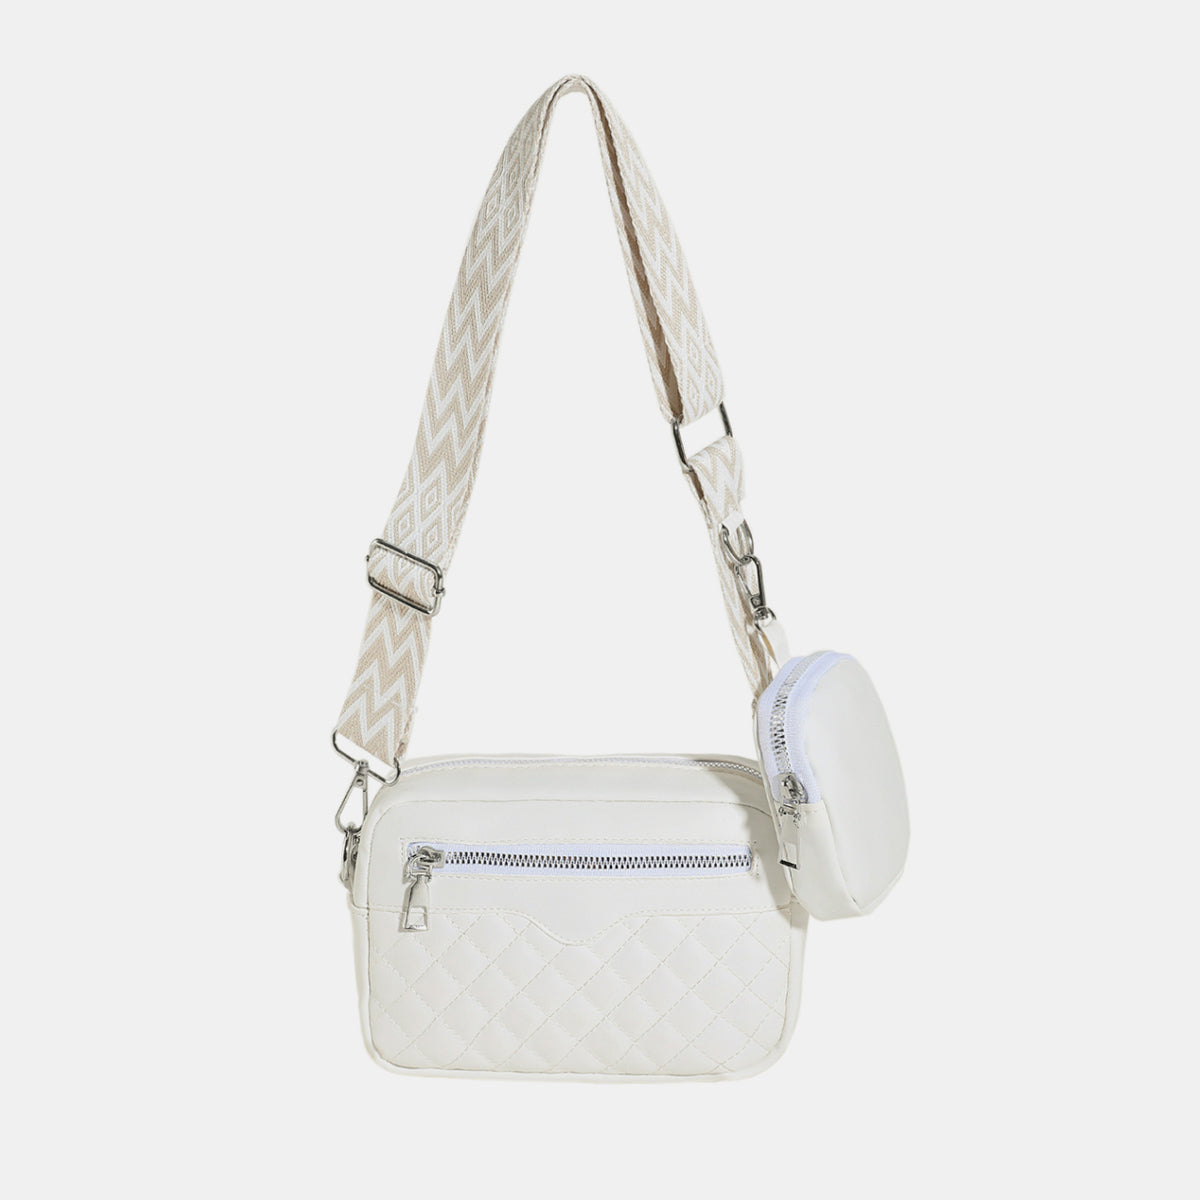 Stitching PU Leather Shoulder Bag White One Size